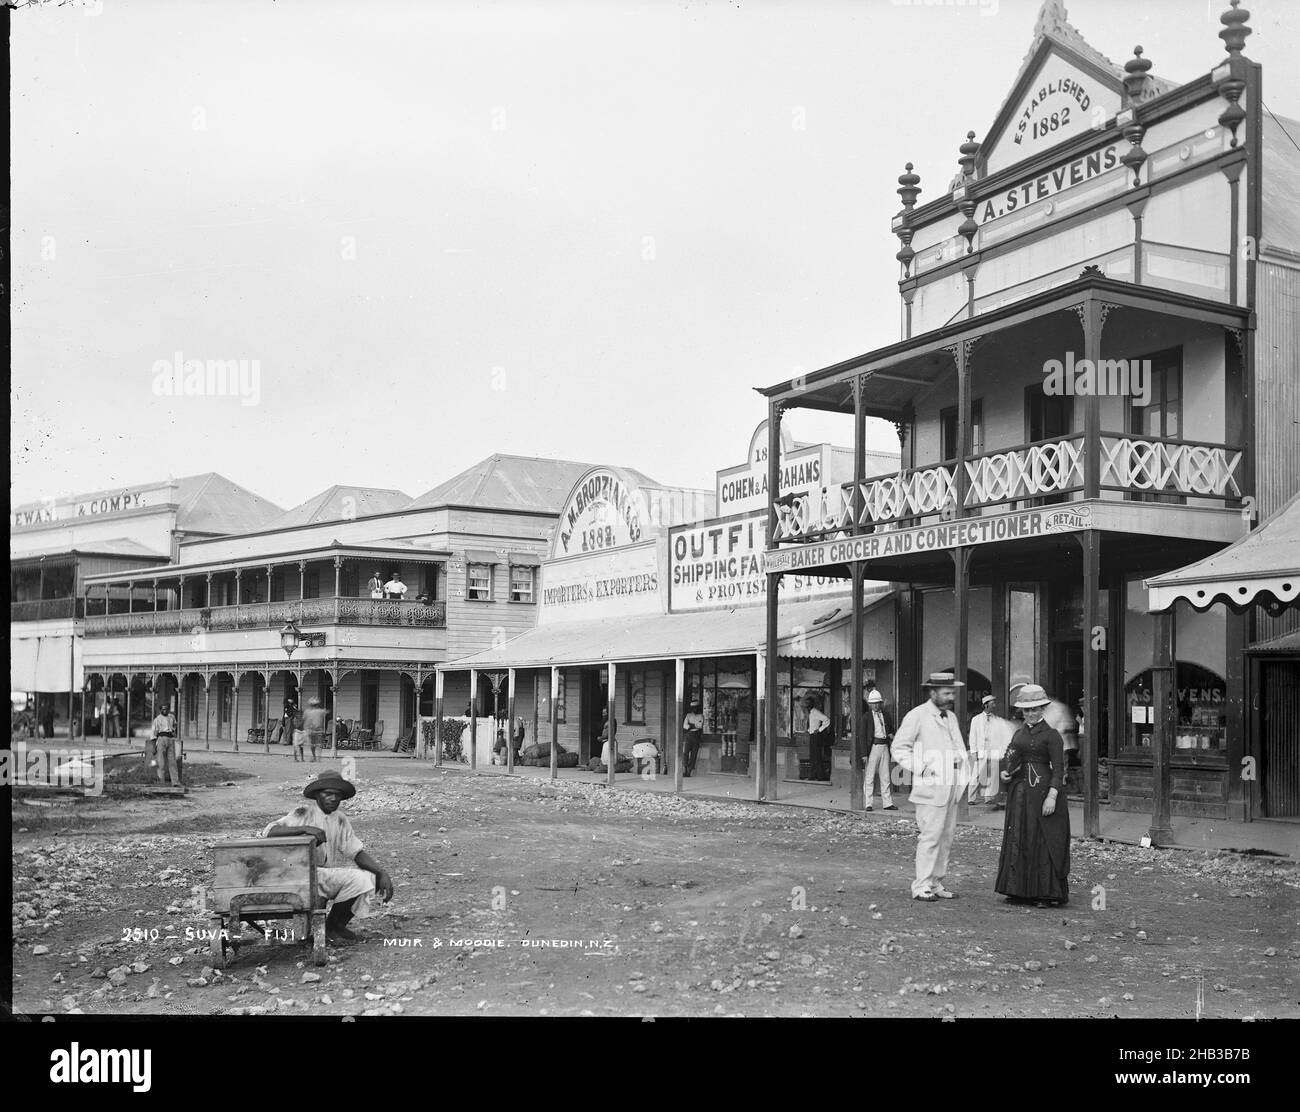 Suva, Fiji, Burton Brothers studio, photography studio, 1884, New Zealand, gelatin dry plate process, A populated Suva street lined with businesses. Two of these were established in 1882, just two years before Burton took this photograph. The shops reflect the needs of a growing market of European tourists. Shopfronts include 'Cohen & Abrahams Outfitters' - a shipping supplies and provisions store, 'A. M. Brodziak & Co. Importers and Exporters', and 'A. Stevens - Baker, Grocer & Confectioner Stock Photo